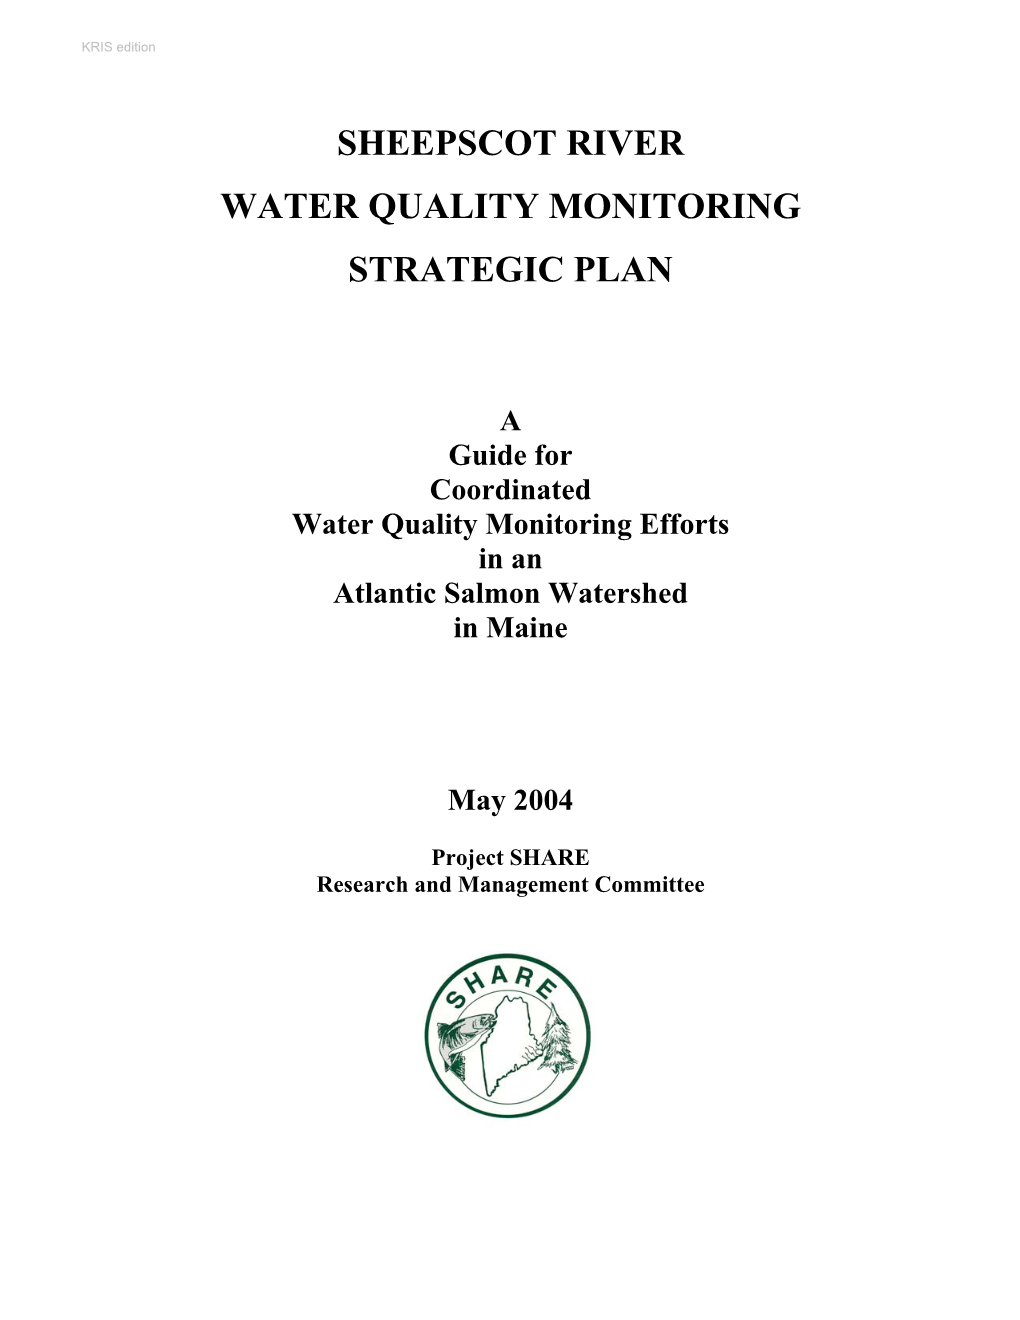 Sheepscot River Water Quality Monitoring